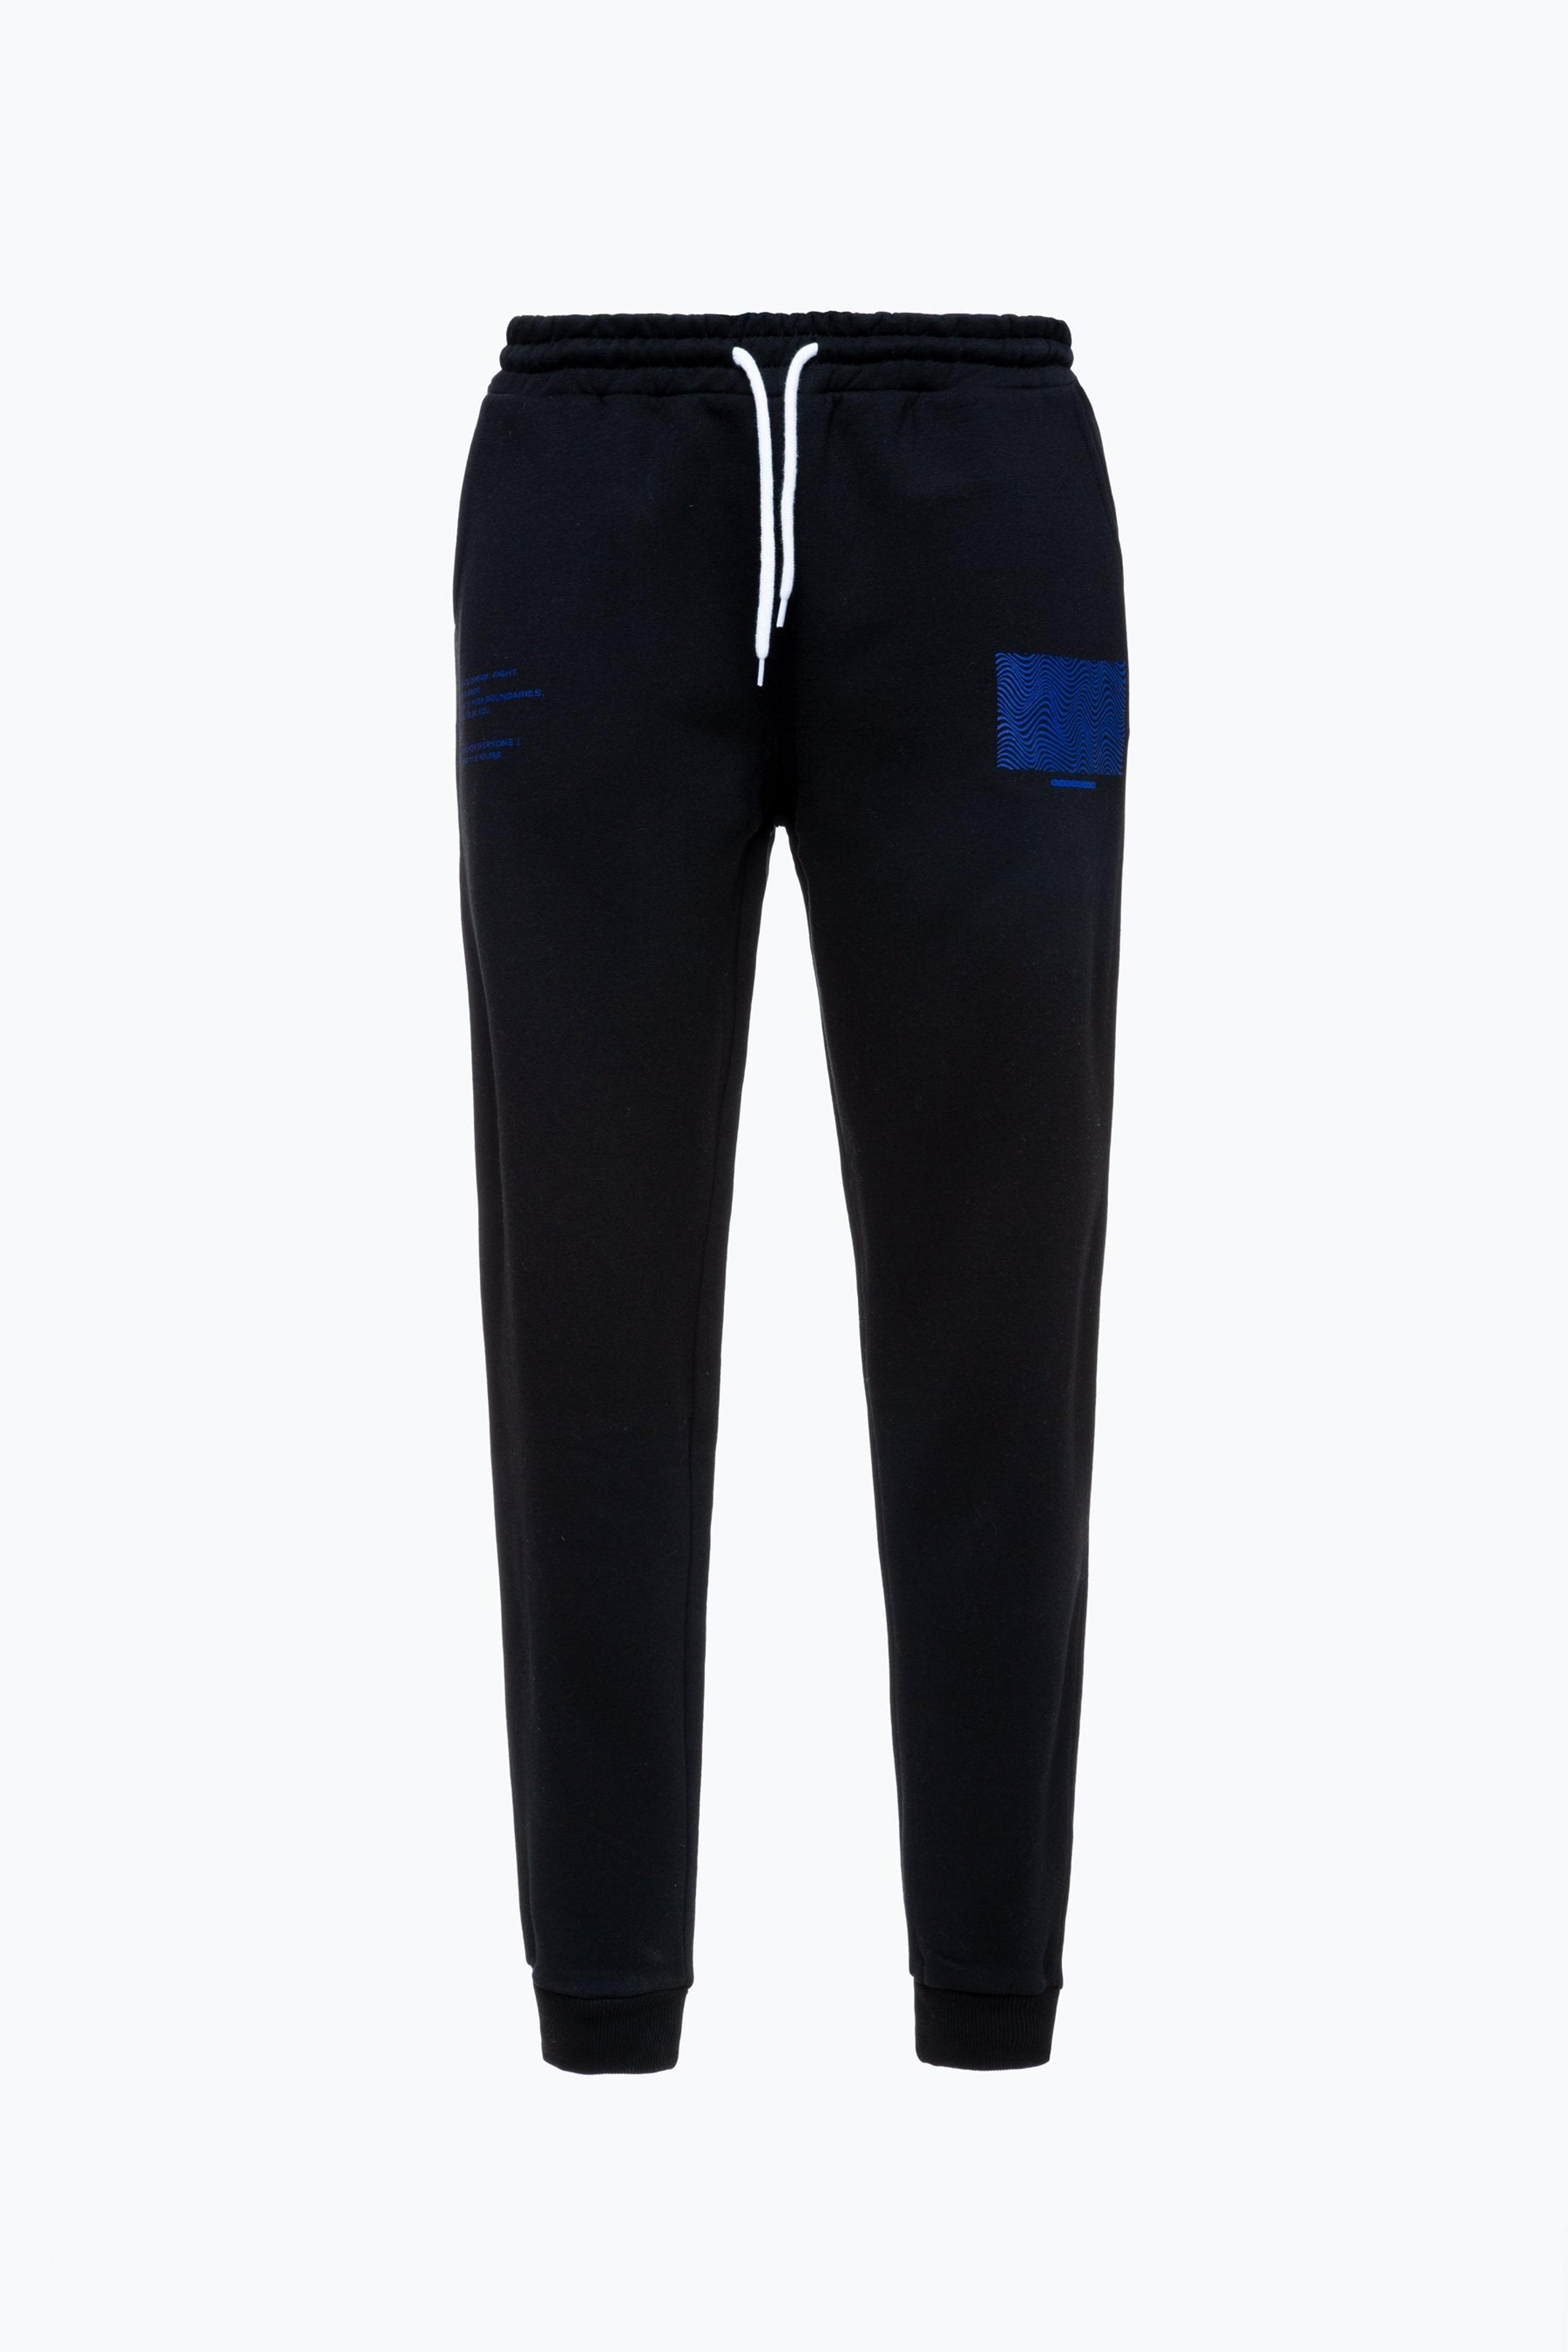 Alternate View 6 of CONTINU8 SOLID BLACK JOGGERS